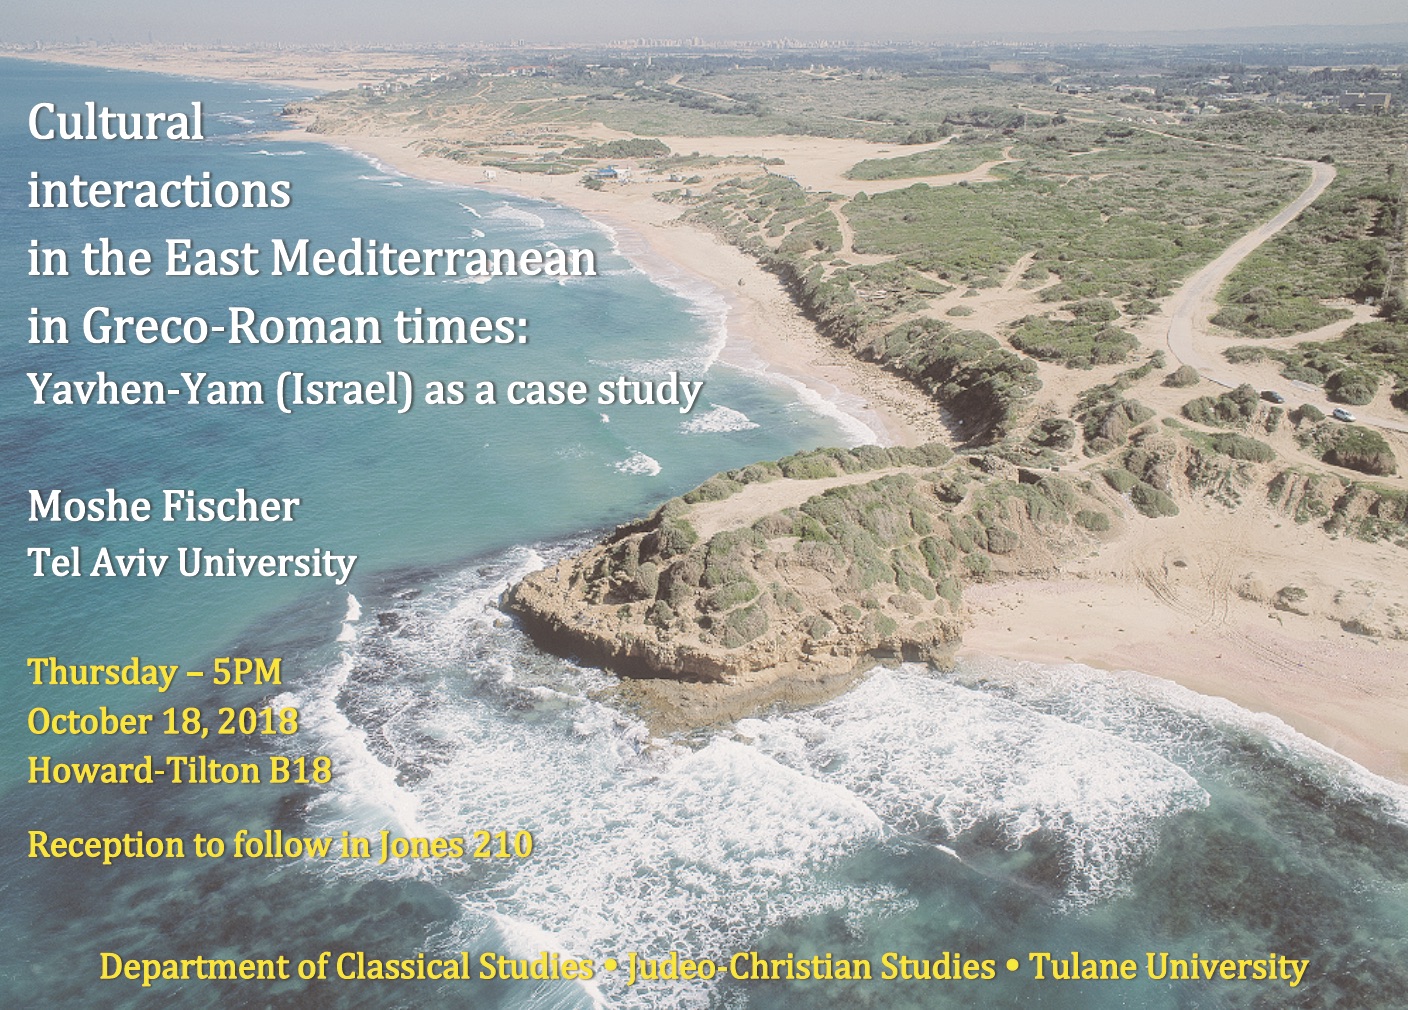 Flyer for the 2018 Cultural interactions in the East Mediterranean in Greco-Roman times lecture